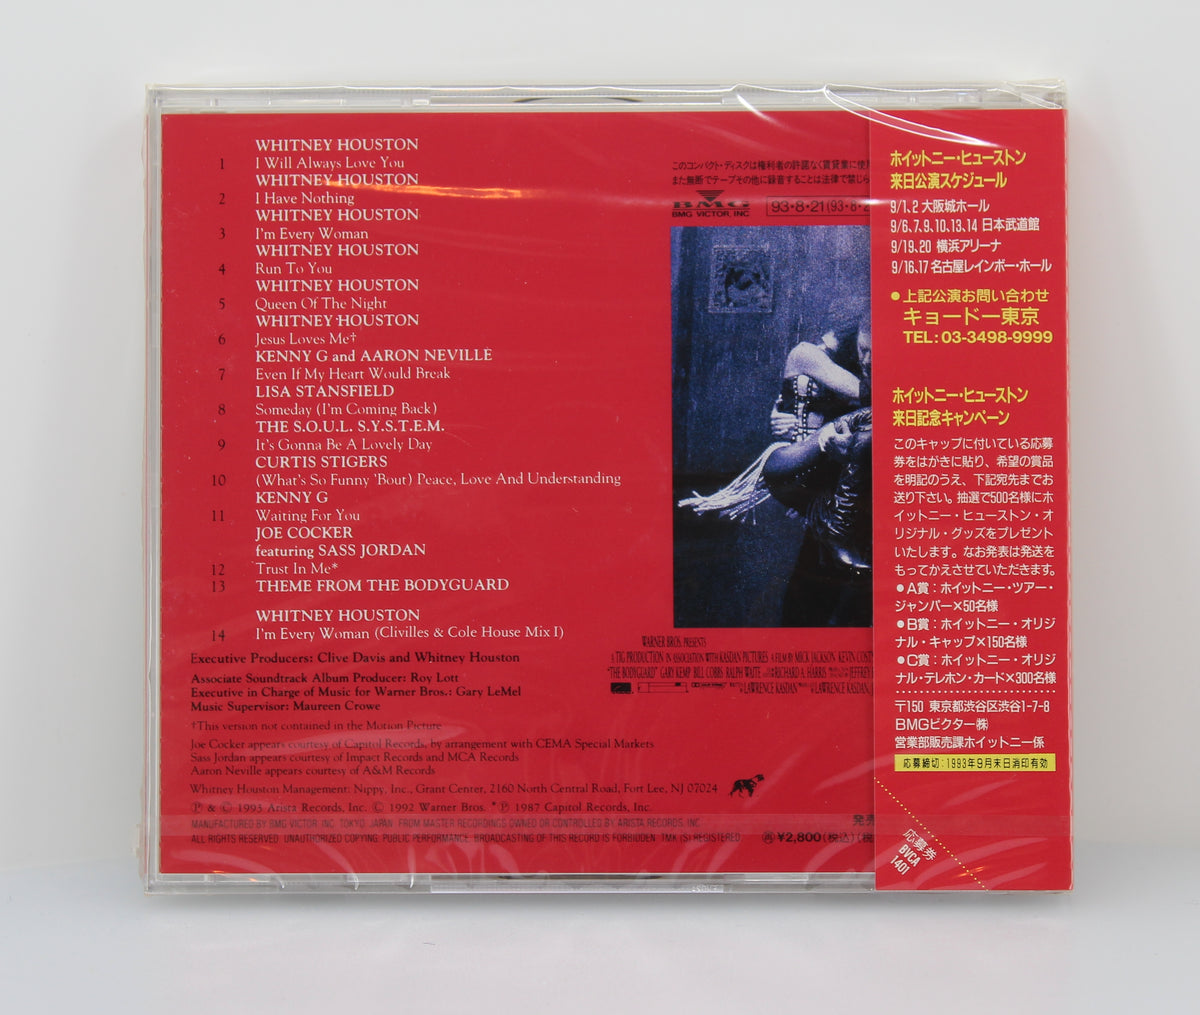 Whitney Houston and Various Artists - The Bodyguard (Original Soundtrack Album), CD, Compilation, Limited Edition, Japan 1993